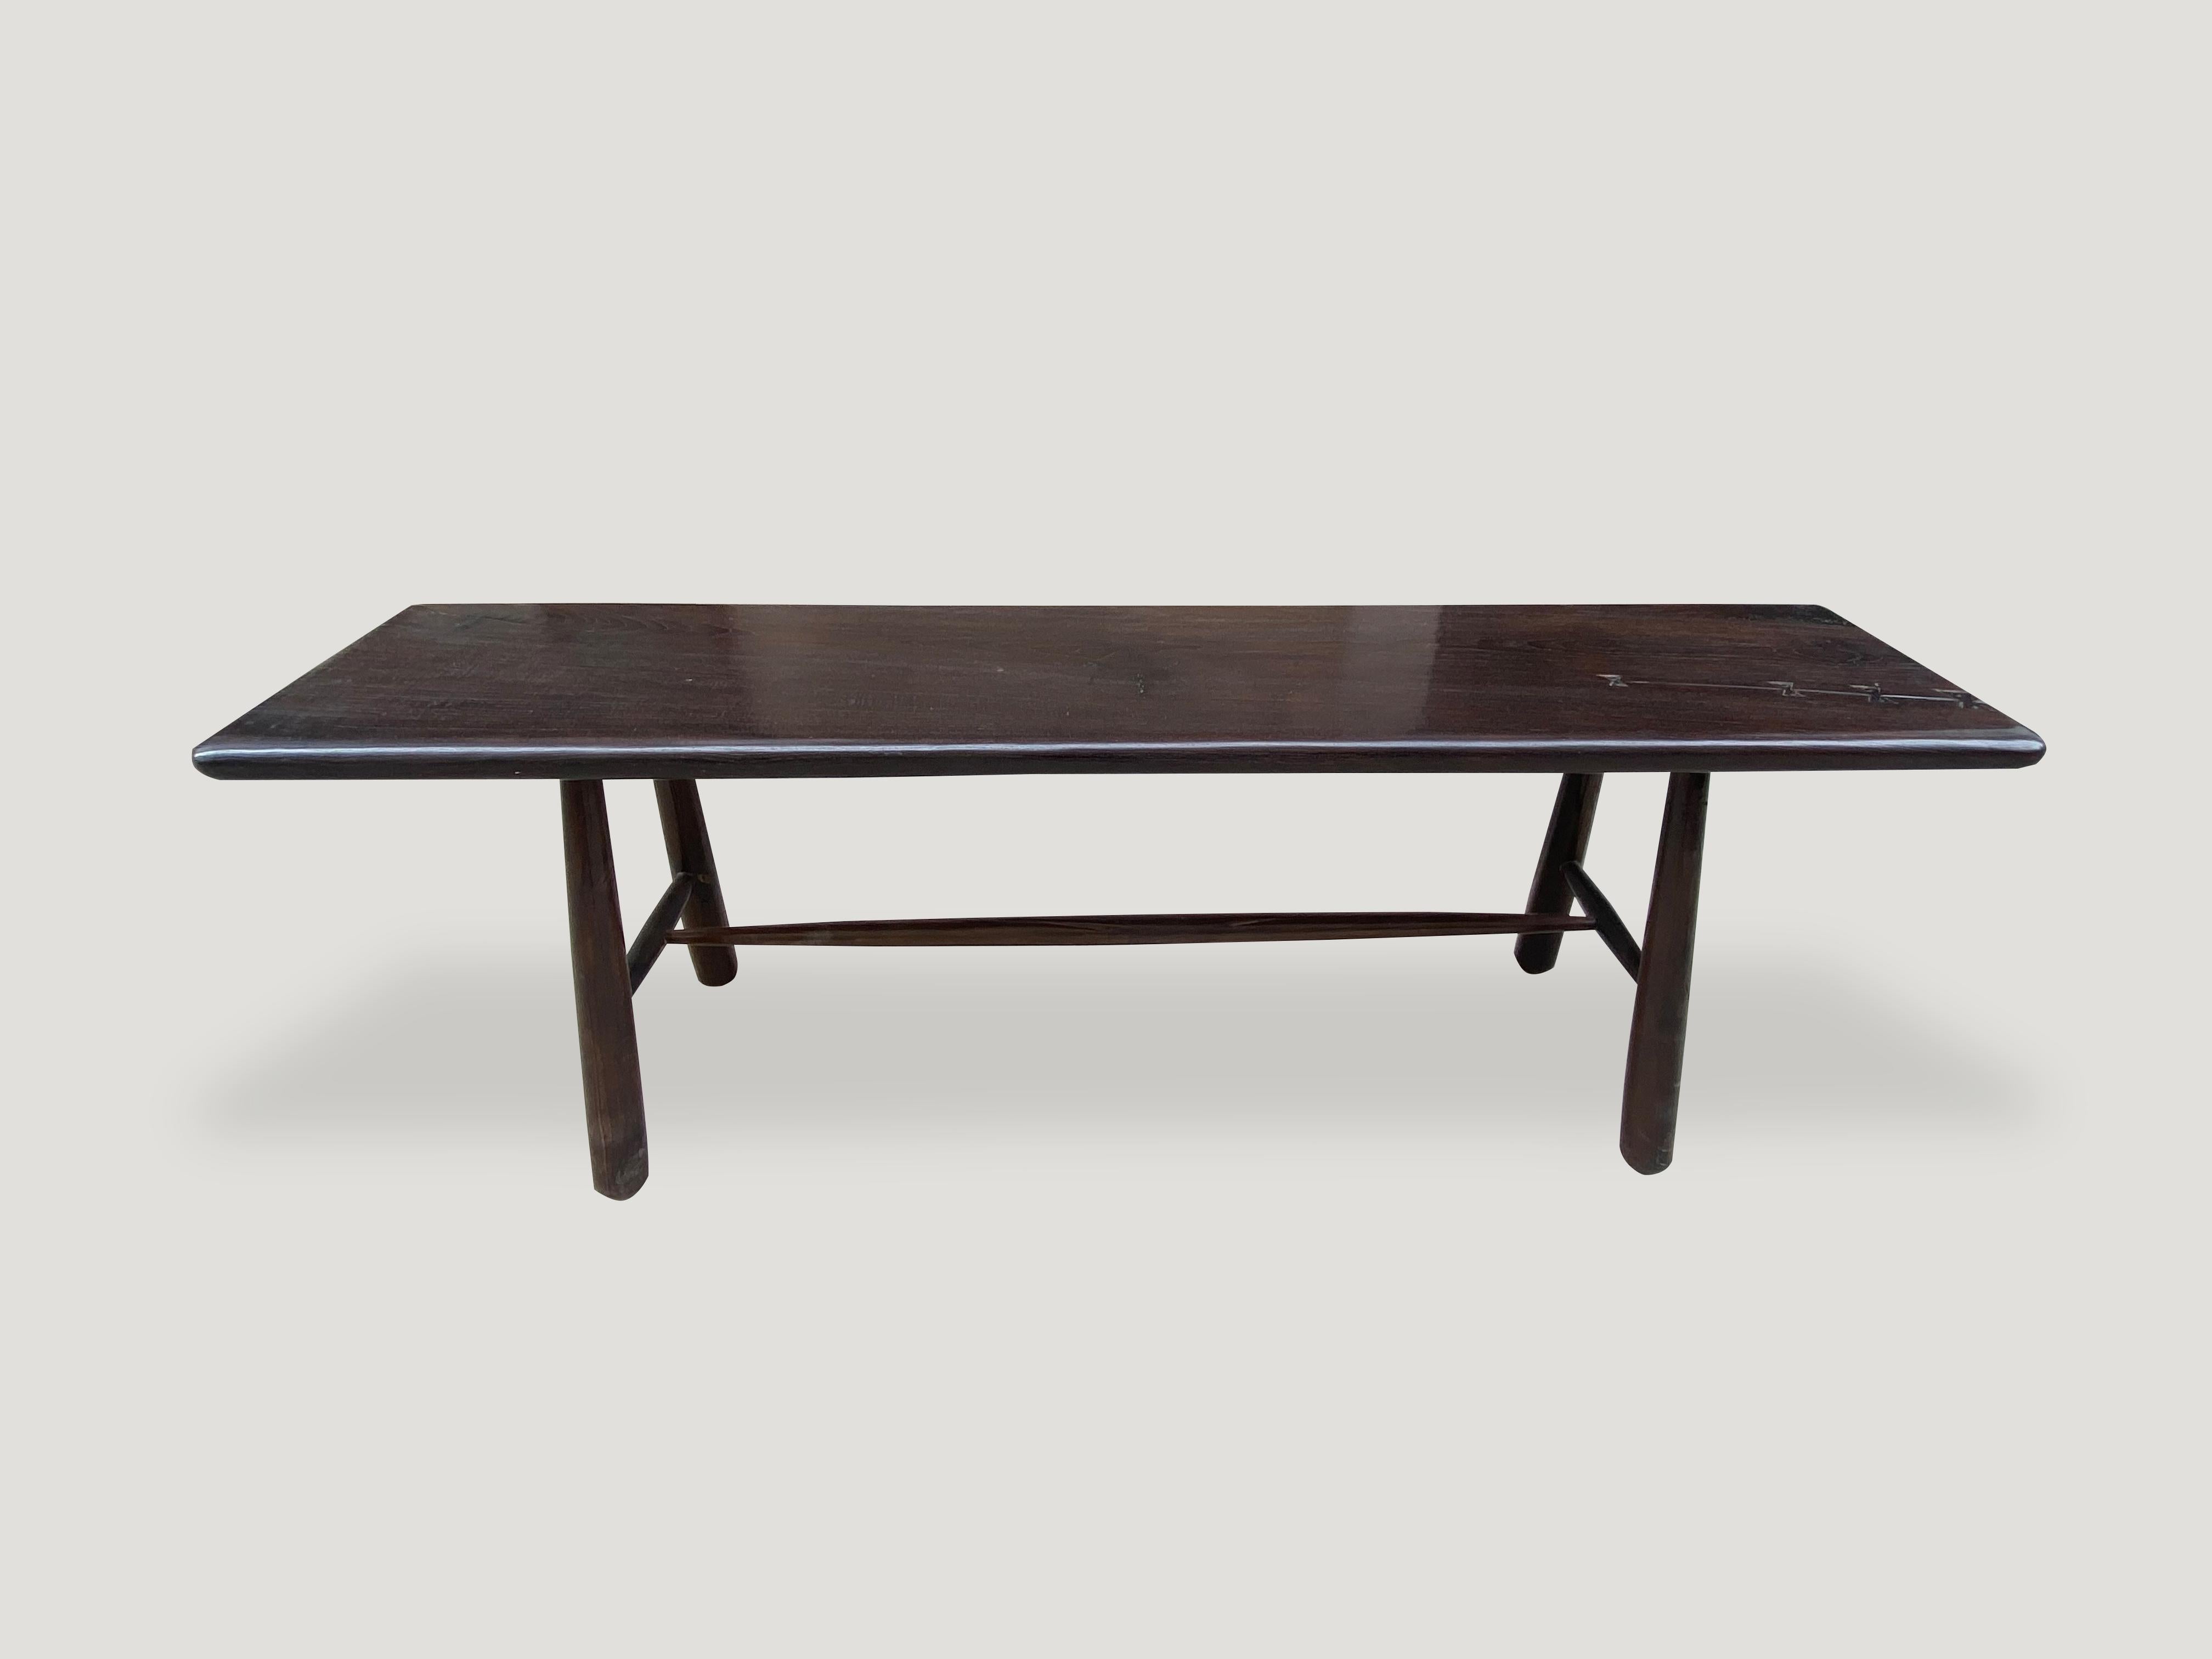 Andrianna Shamaris Midcentury Couture Espresso Stained Teak Wood Console Table In Excellent Condition For Sale In New York, NY